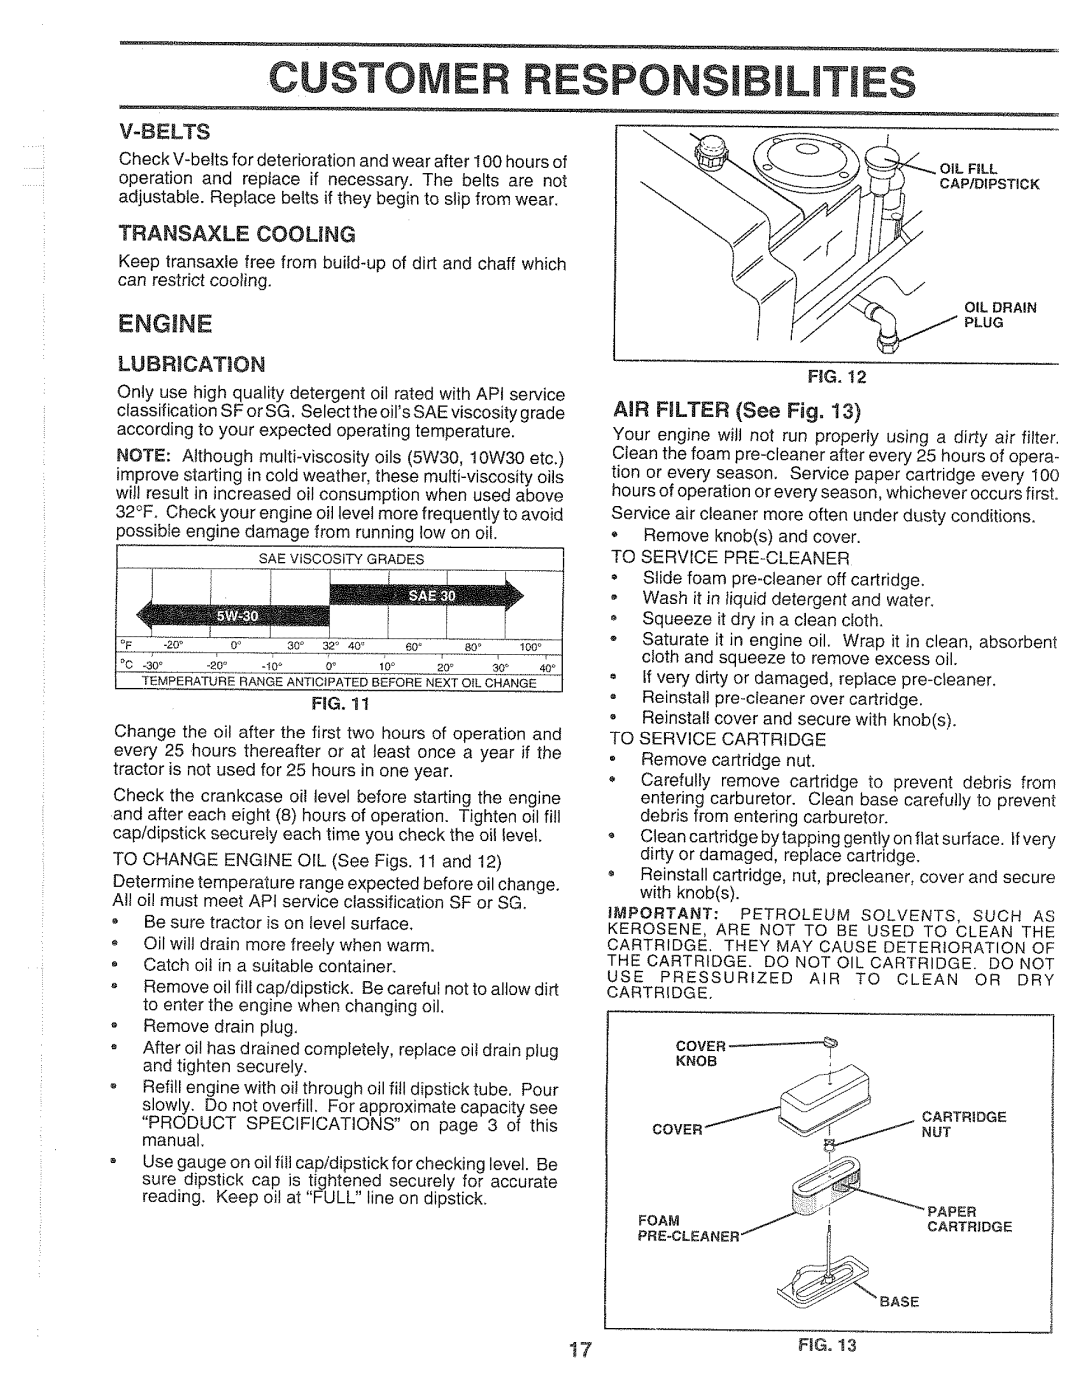 Sears 917.2565 manual Oustome, Espons, L Es, Eng|Ne, V-Belts, Transaxle Cooling, AIR FILTER See Fig, Lubrication 